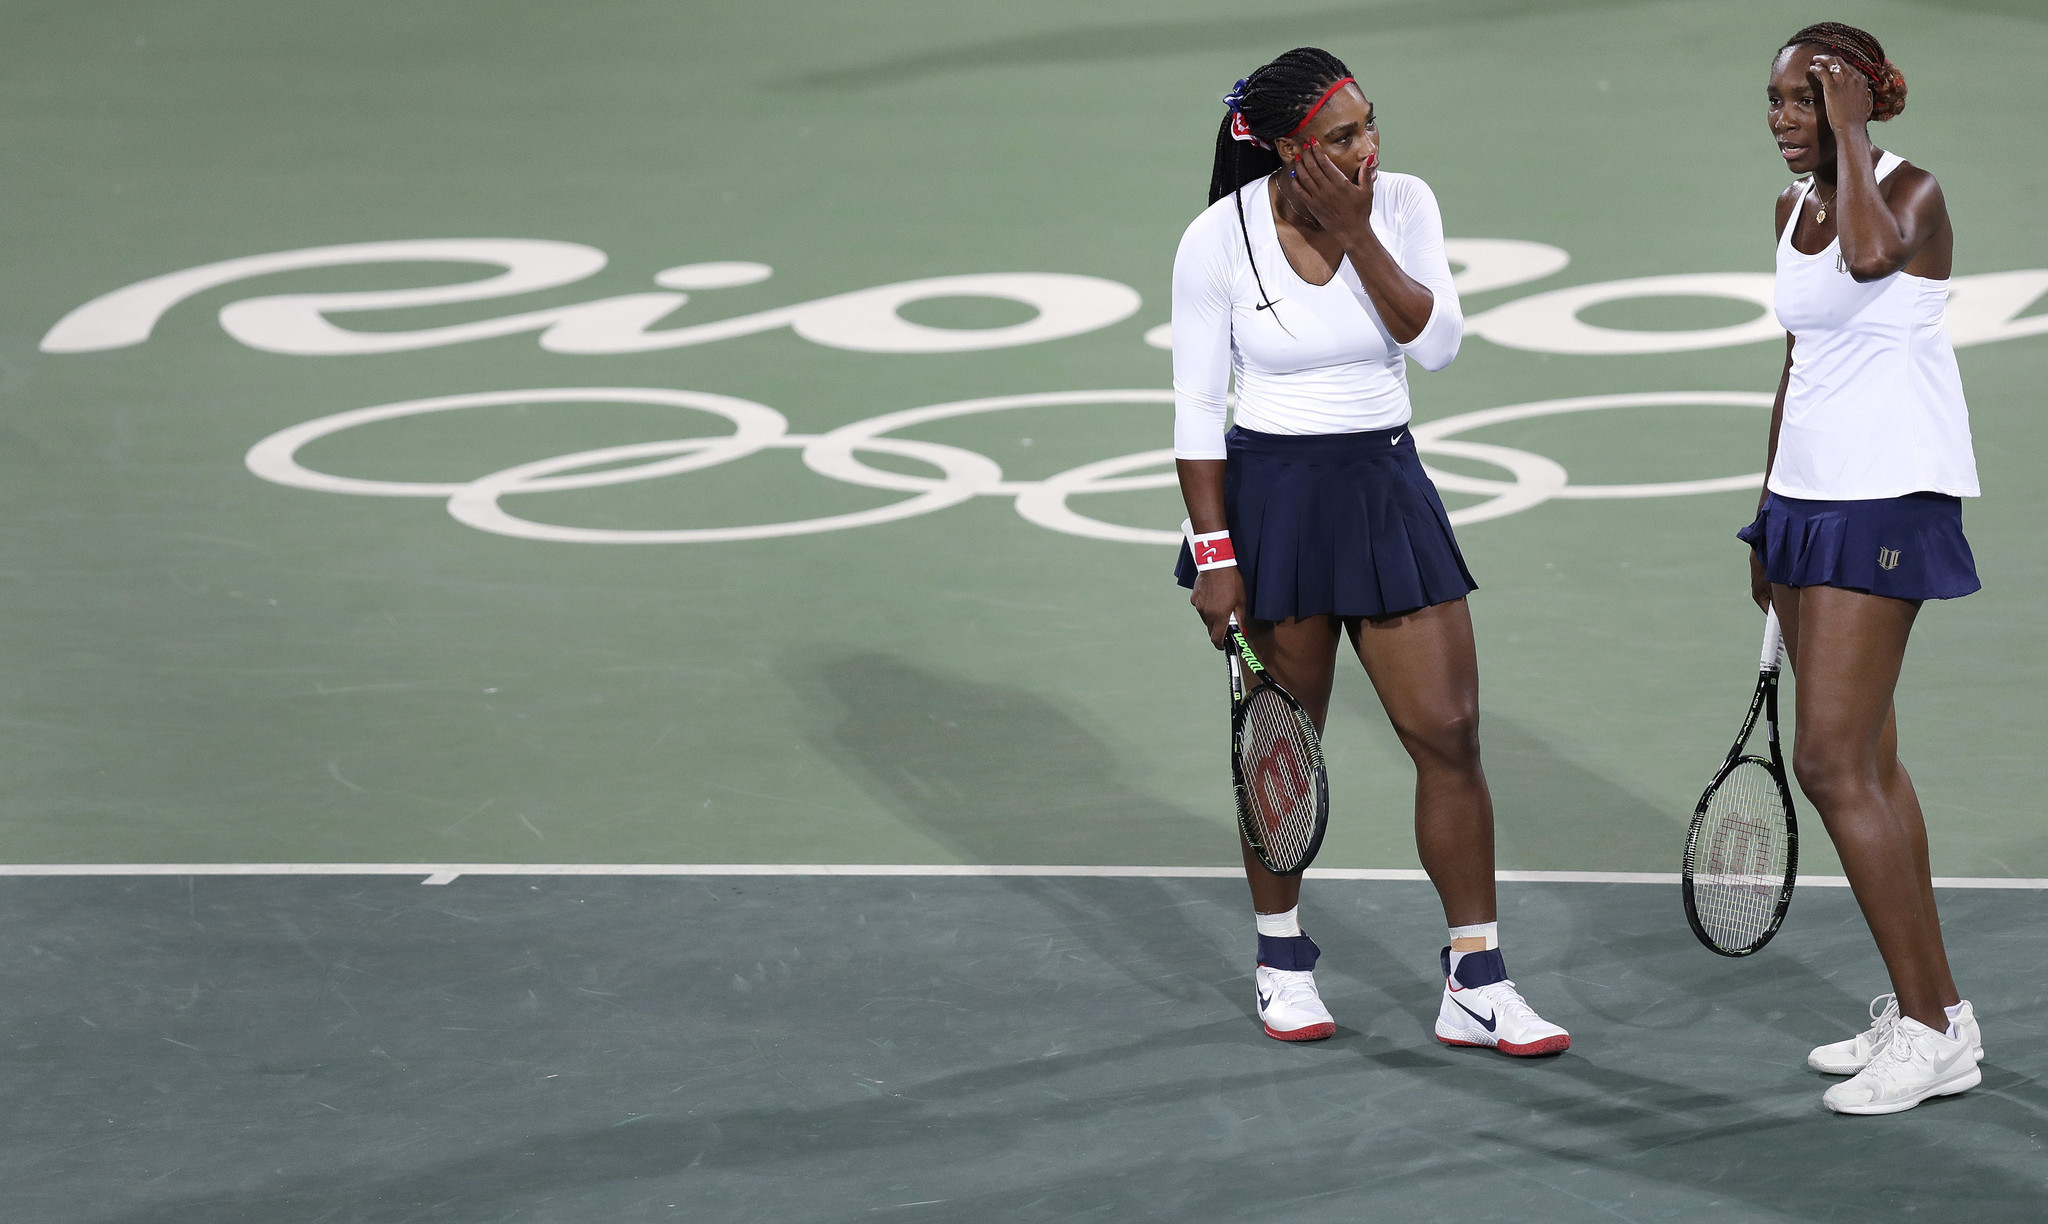 Williams sisters lose Olympic doubles match for 1st time - Chicago Tribune